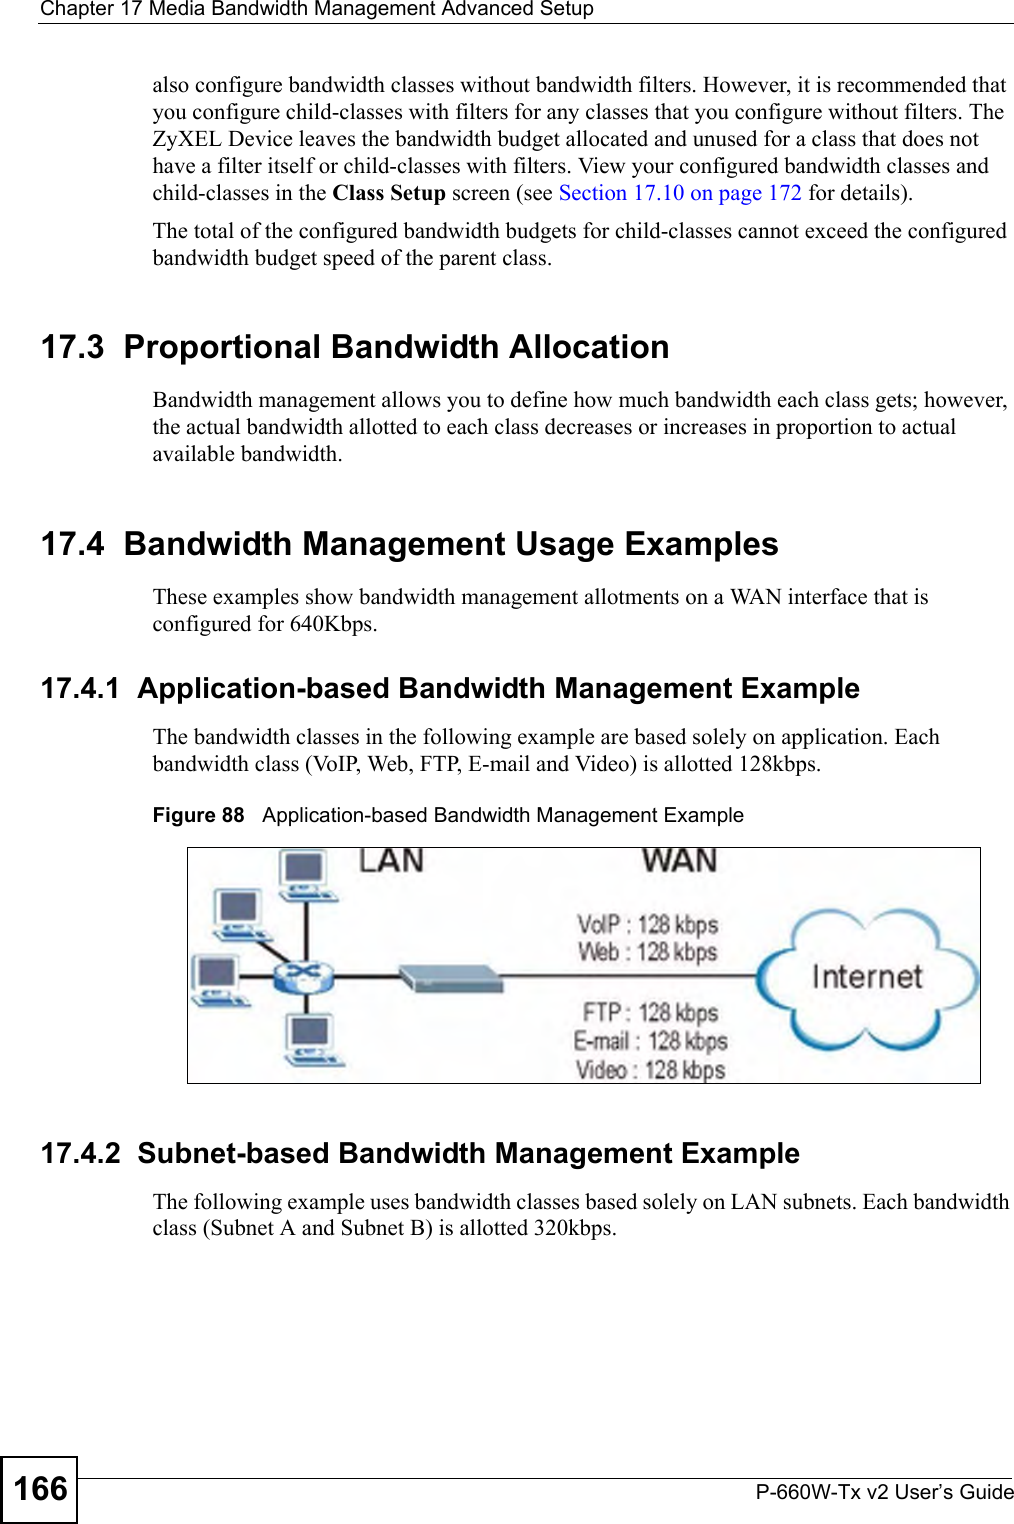 Chapter 17 Media Bandwidth Management Advanced SetupP-660W-Tx v2 User’s Guide166also configure bandwidth classes without bandwidth filters. However, it is recommended that you configure child-classes with filters for any classes that you configure without filters. The ZyXEL Device leaves the bandwidth budget allocated and unused for a class that does not have a filter itself or child-classes with filters. View your configured bandwidth classes and child-classes in the Class Setup screen (see Section 17.10 on page 172 for details).The total of the configured bandwidth budgets for child-classes cannot exceed the configured bandwidth budget speed of the parent class. 17.3  Proportional Bandwidth AllocationBandwidth management allows you to define how much bandwidth each class gets; however, the actual bandwidth allotted to each class decreases or increases in proportion to actual available bandwidth. 17.4  Bandwidth Management Usage ExamplesThese examples show bandwidth management allotments on a WAN interface that is configured for 640Kbps.17.4.1  Application-based Bandwidth Management ExampleThe bandwidth classes in the following example are based solely on application. Each bandwidth class (VoIP, Web, FTP, E-mail and Video) is allotted 128kbps.Figure 88   Application-based Bandwidth Management Example17.4.2  Subnet-based Bandwidth Management ExampleThe following example uses bandwidth classes based solely on LAN subnets. Each bandwidth class (Subnet A and Subnet B) is allotted 320kbps.